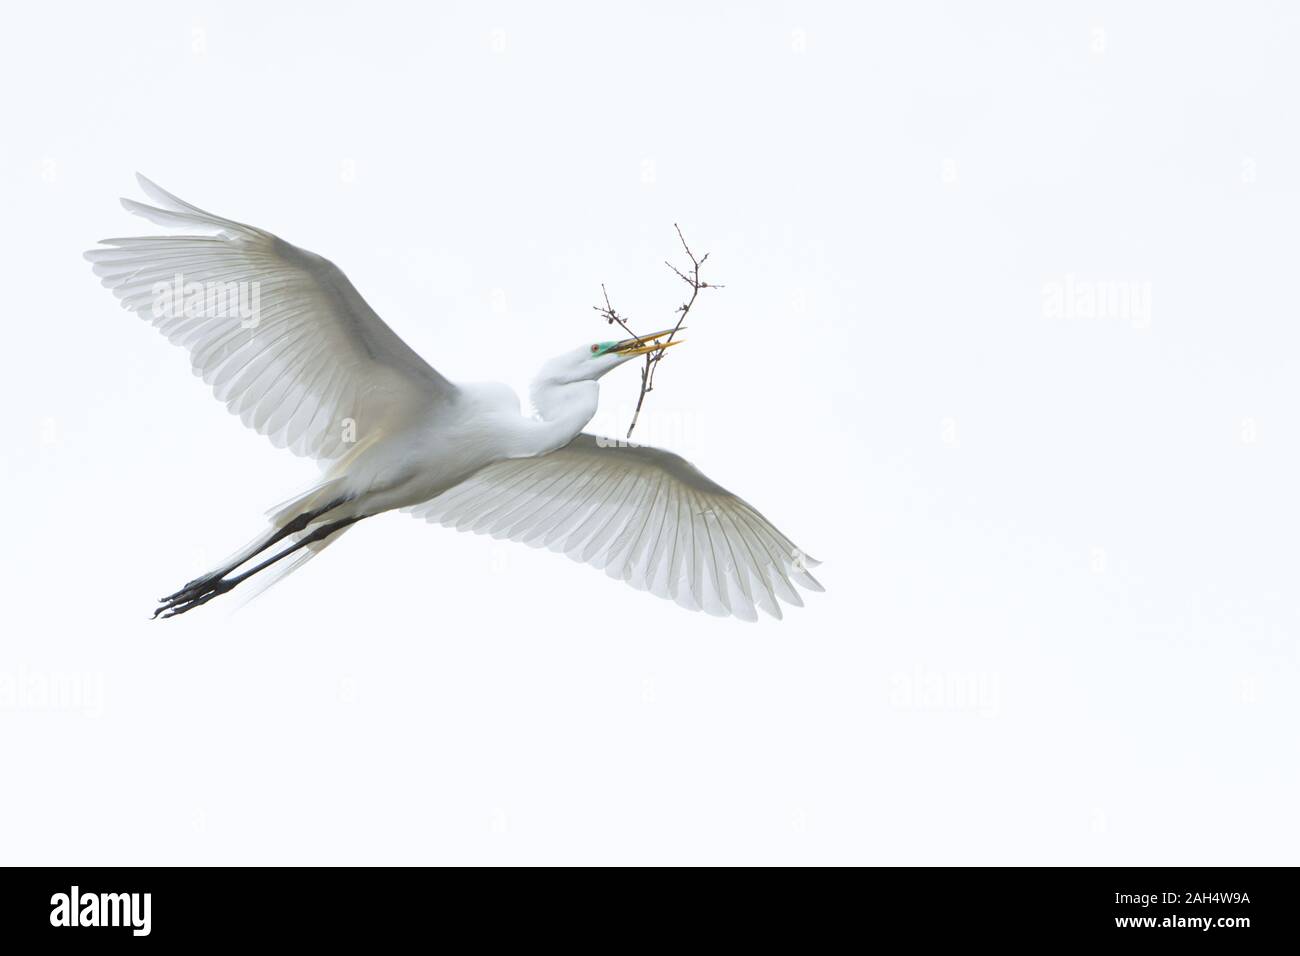 A Great Egret in flight with nesting materials. Stock Photo